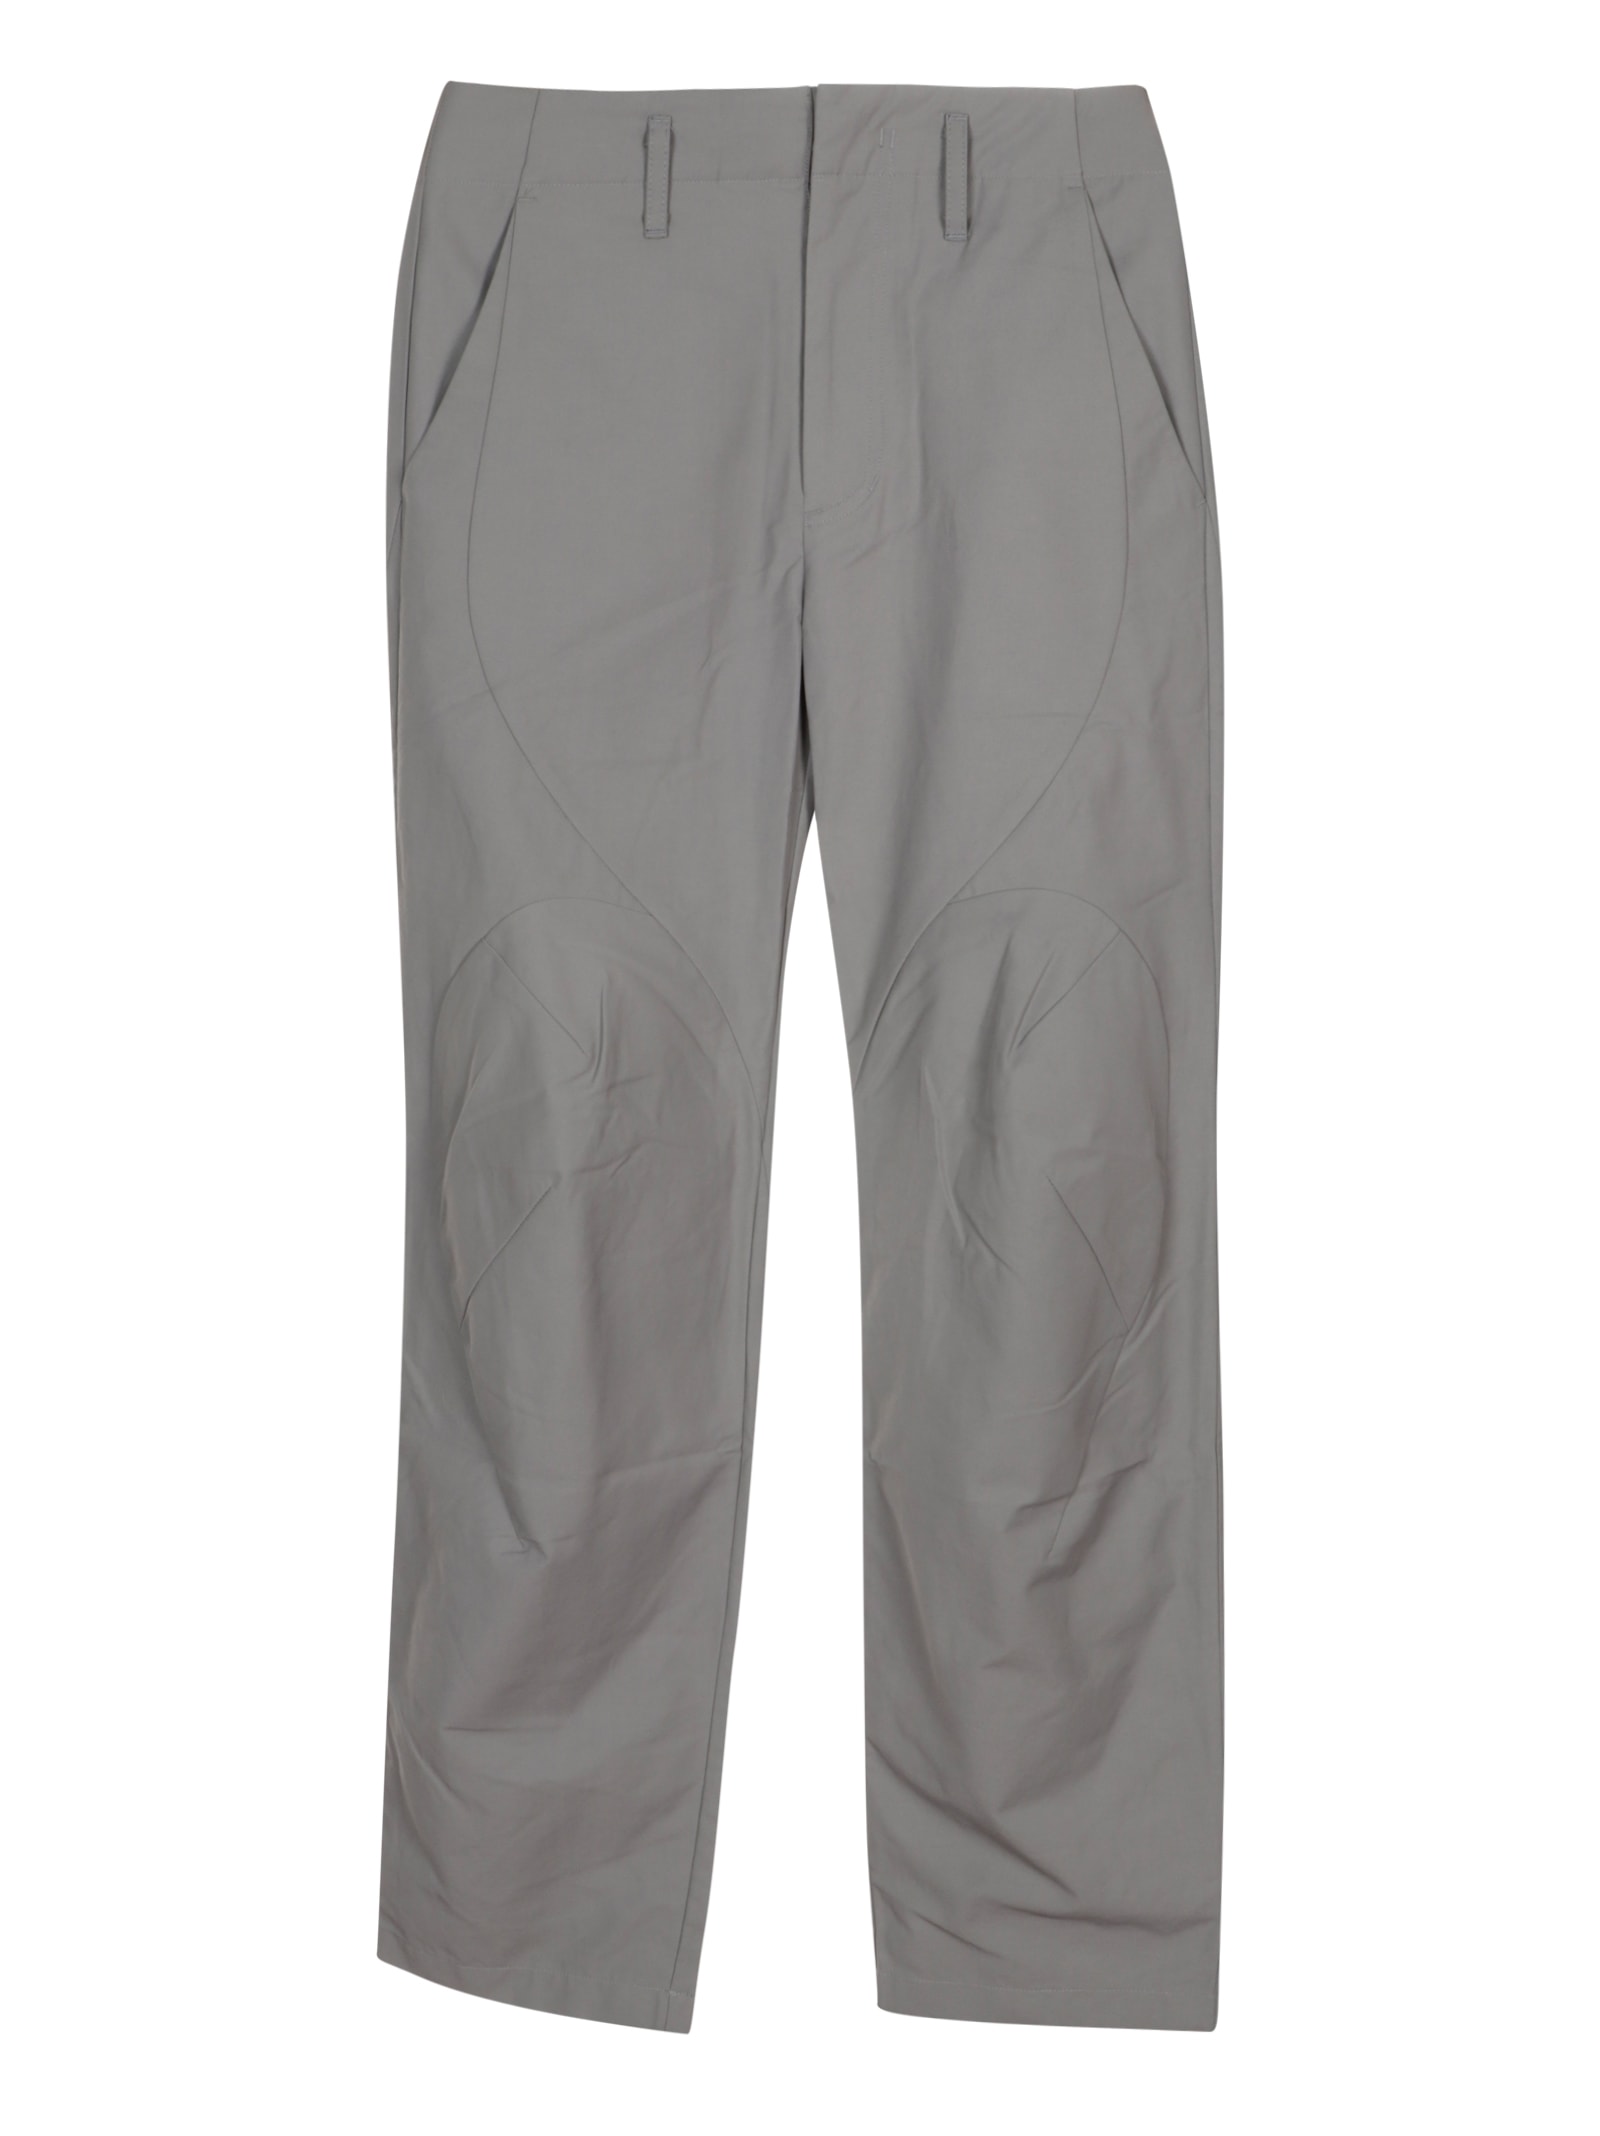 Post Archive Faction Trousers